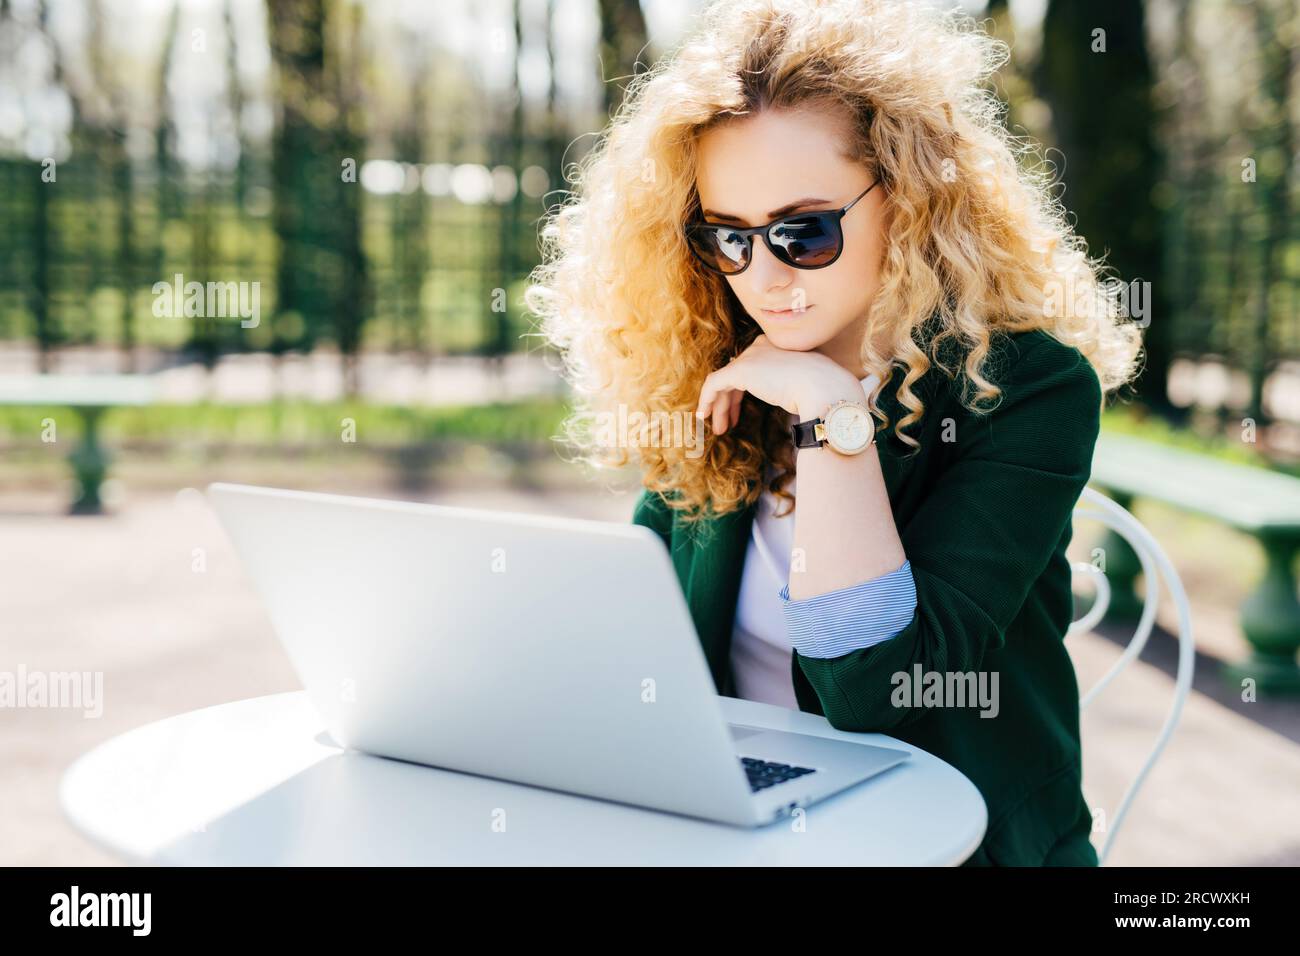 Curly-haired woman in green jacket, sunglasses, reading news on laptop outdoors. Tech-savvy, contemplative. People, technology. Stock Photo